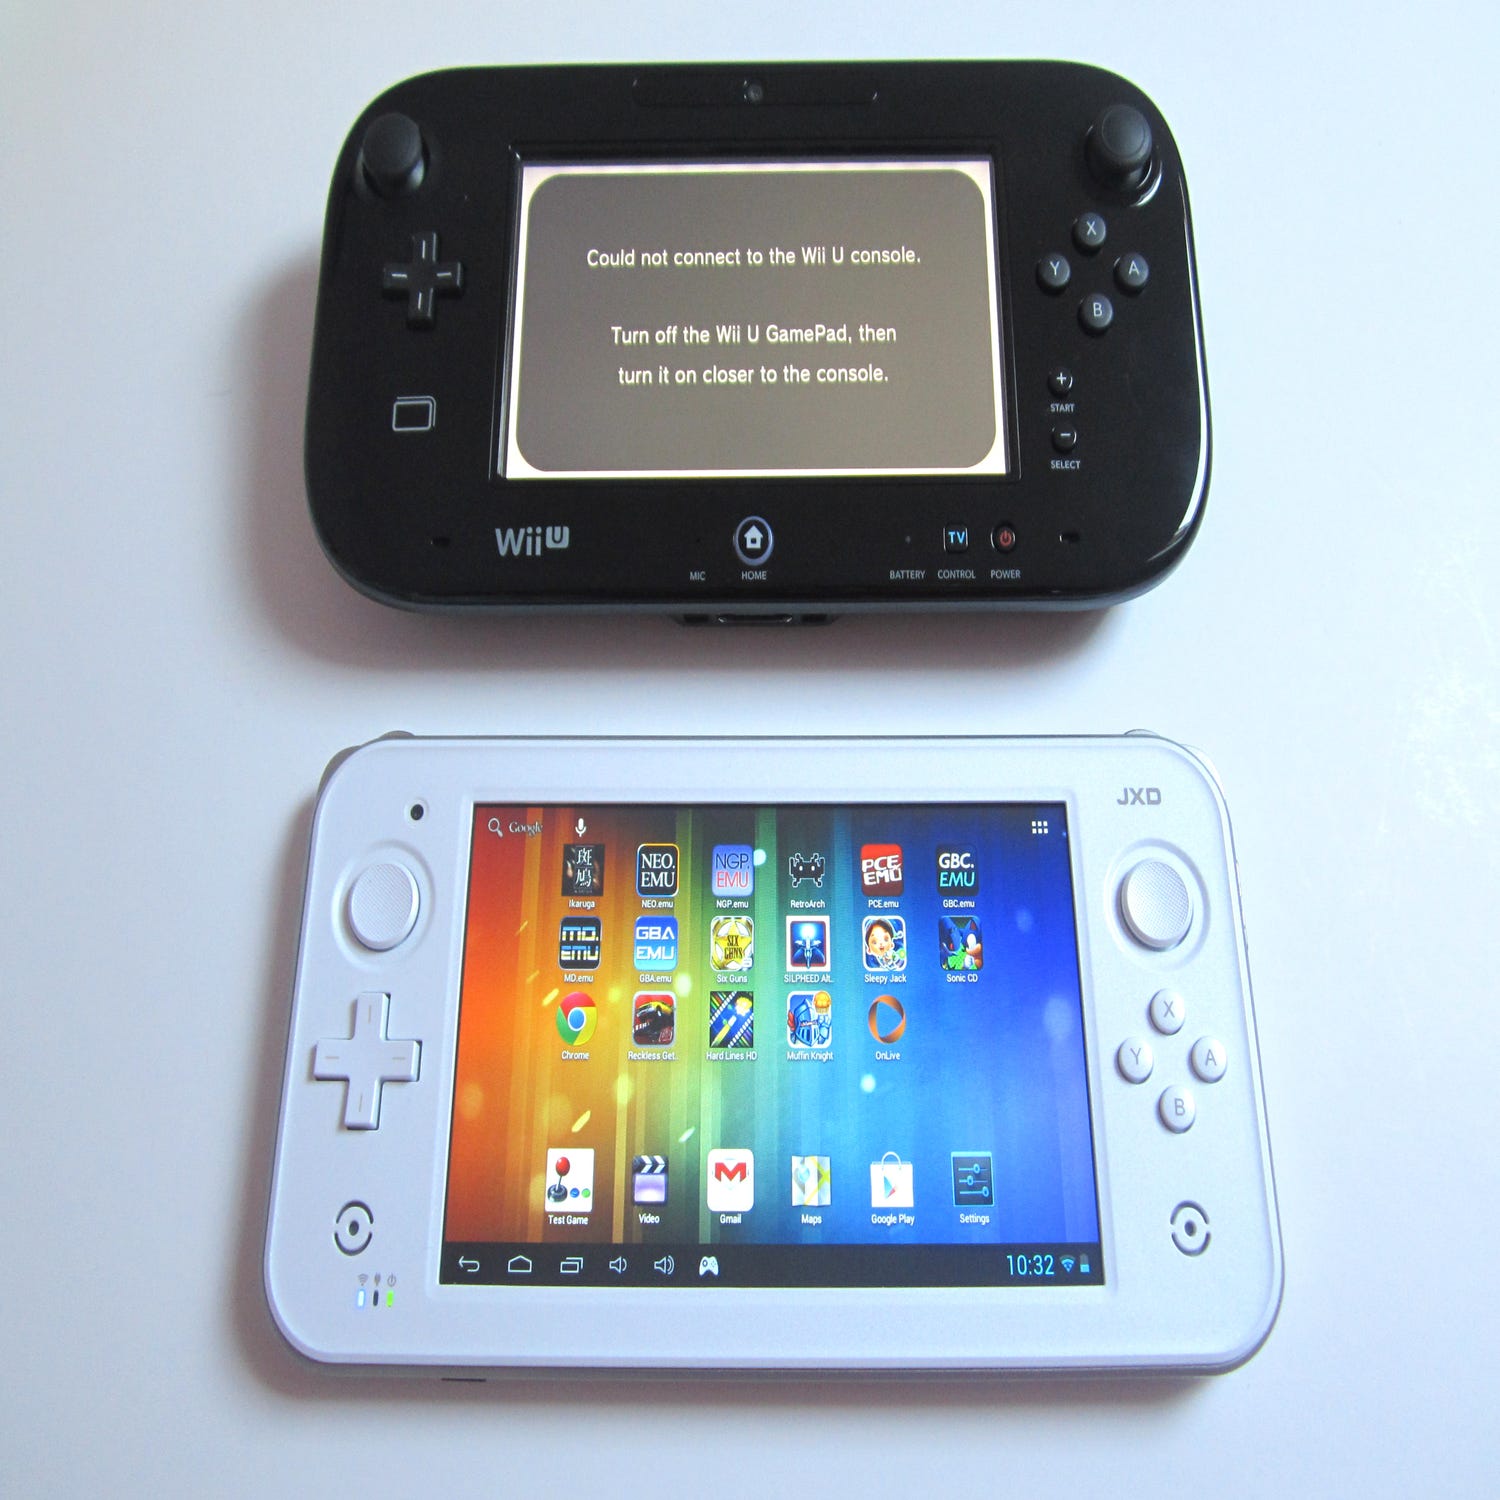 Why Are There No Wii U Emulator Android or iOS Options? 